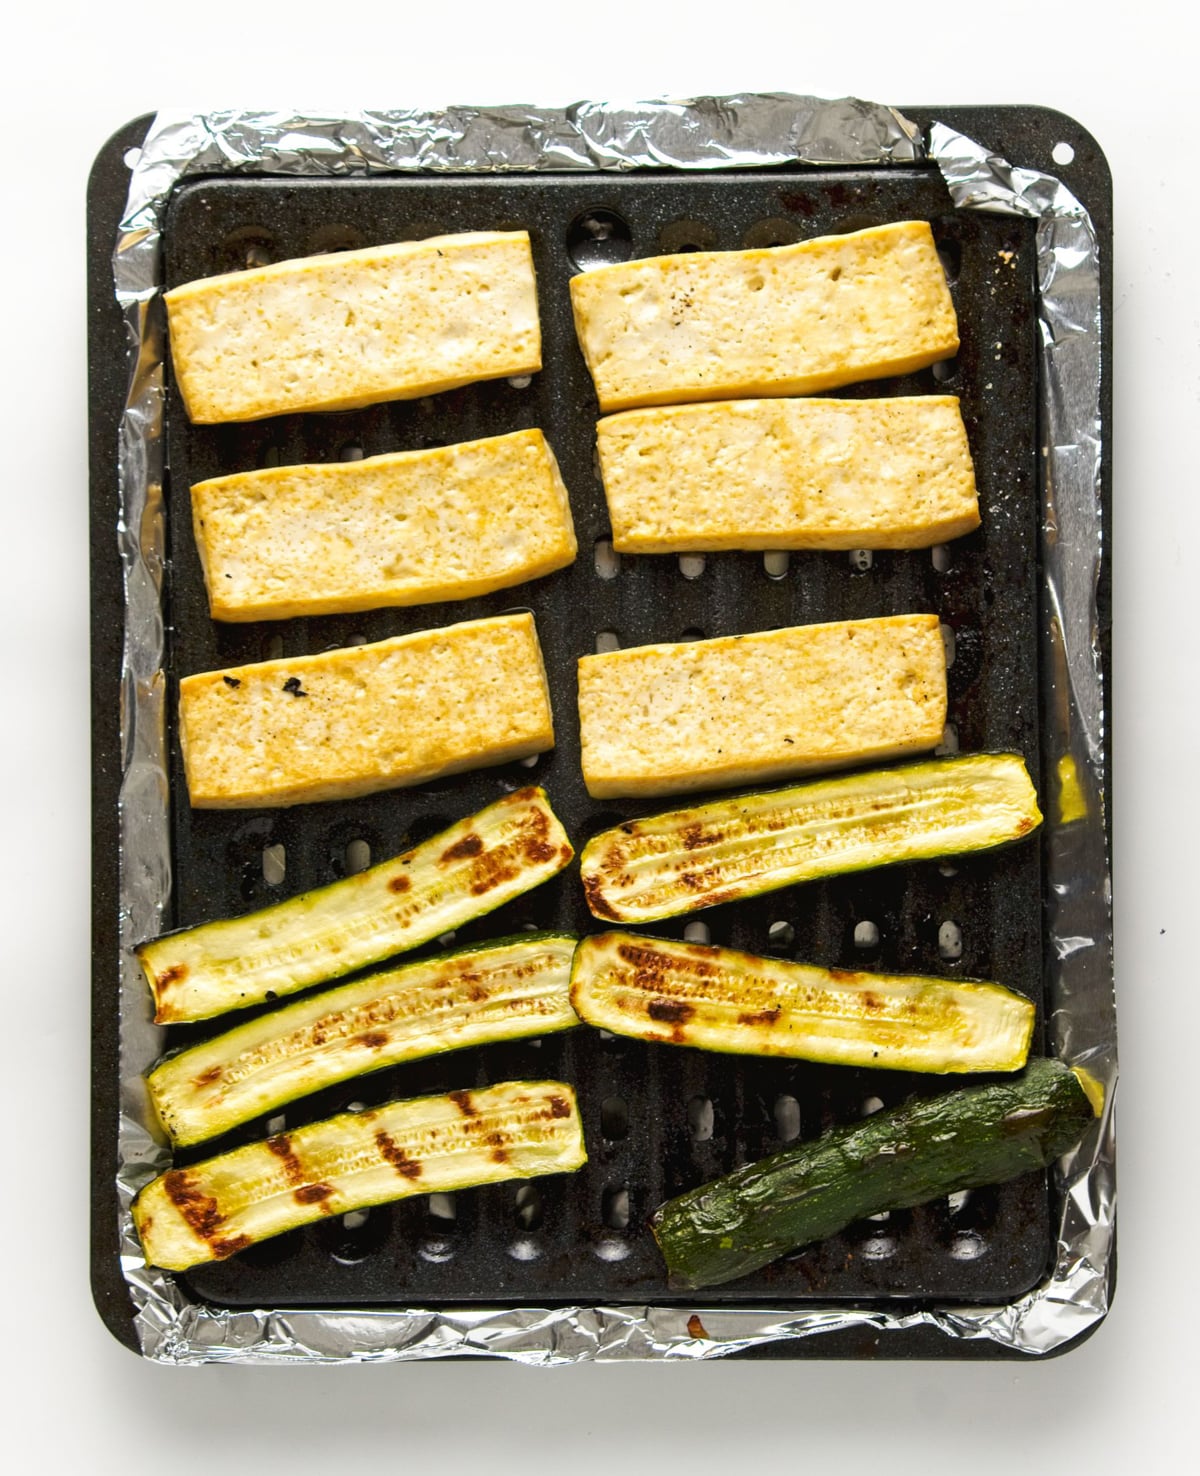 Baked tofu strips and zucchini on a black baking sheet lined with aluminum foil.